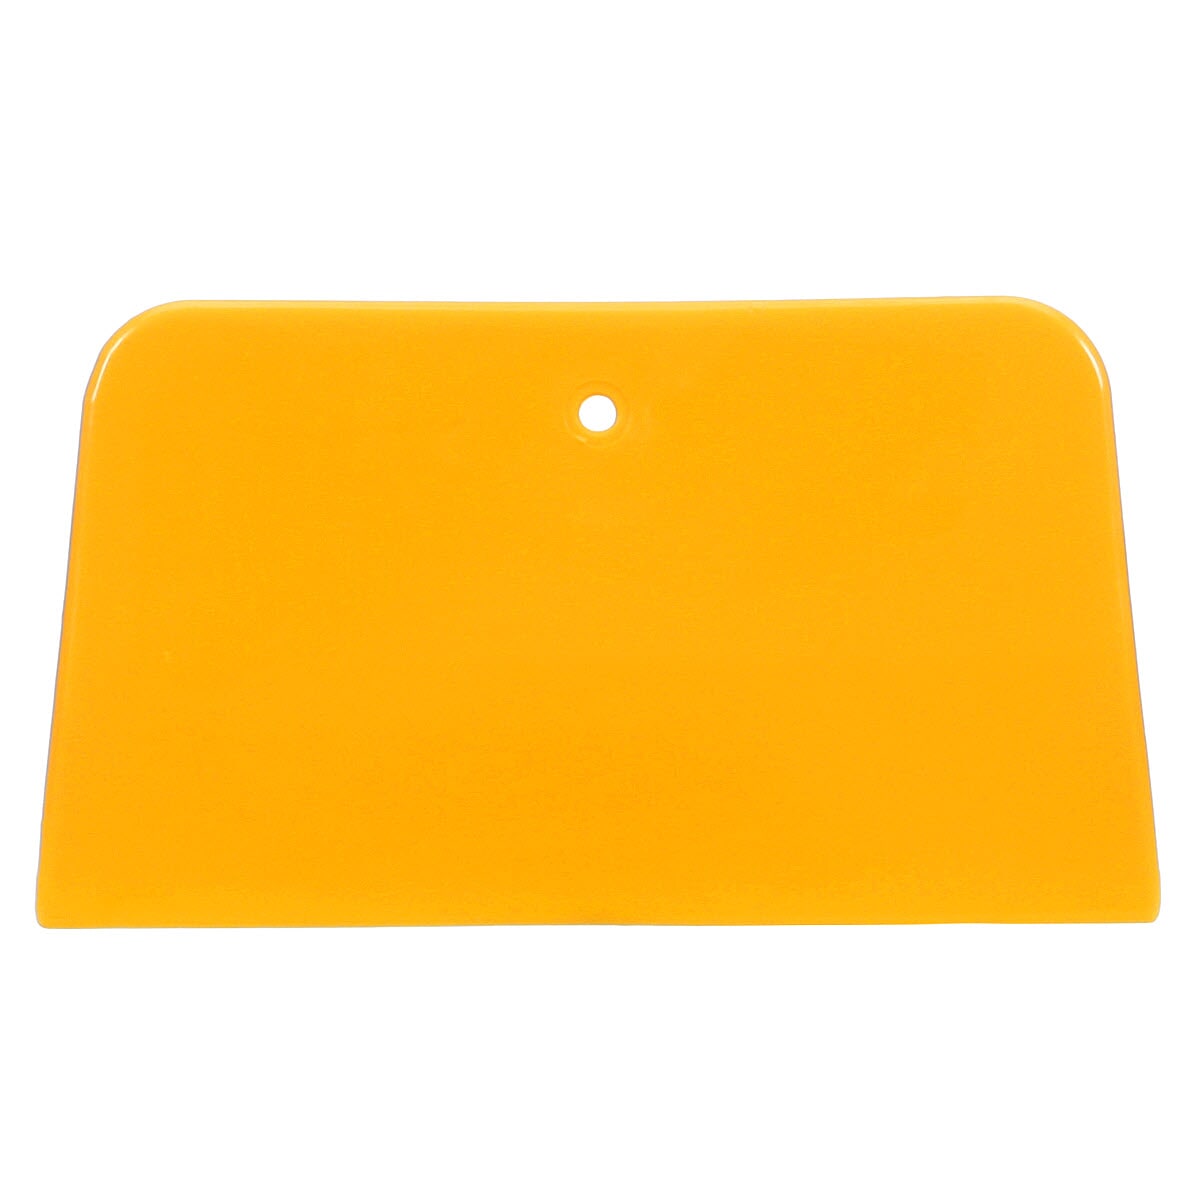 3M 7000049852 Spreader, 3 in W, For Use With Body Fillers, Putties and Glazes, Plastic, Yellow